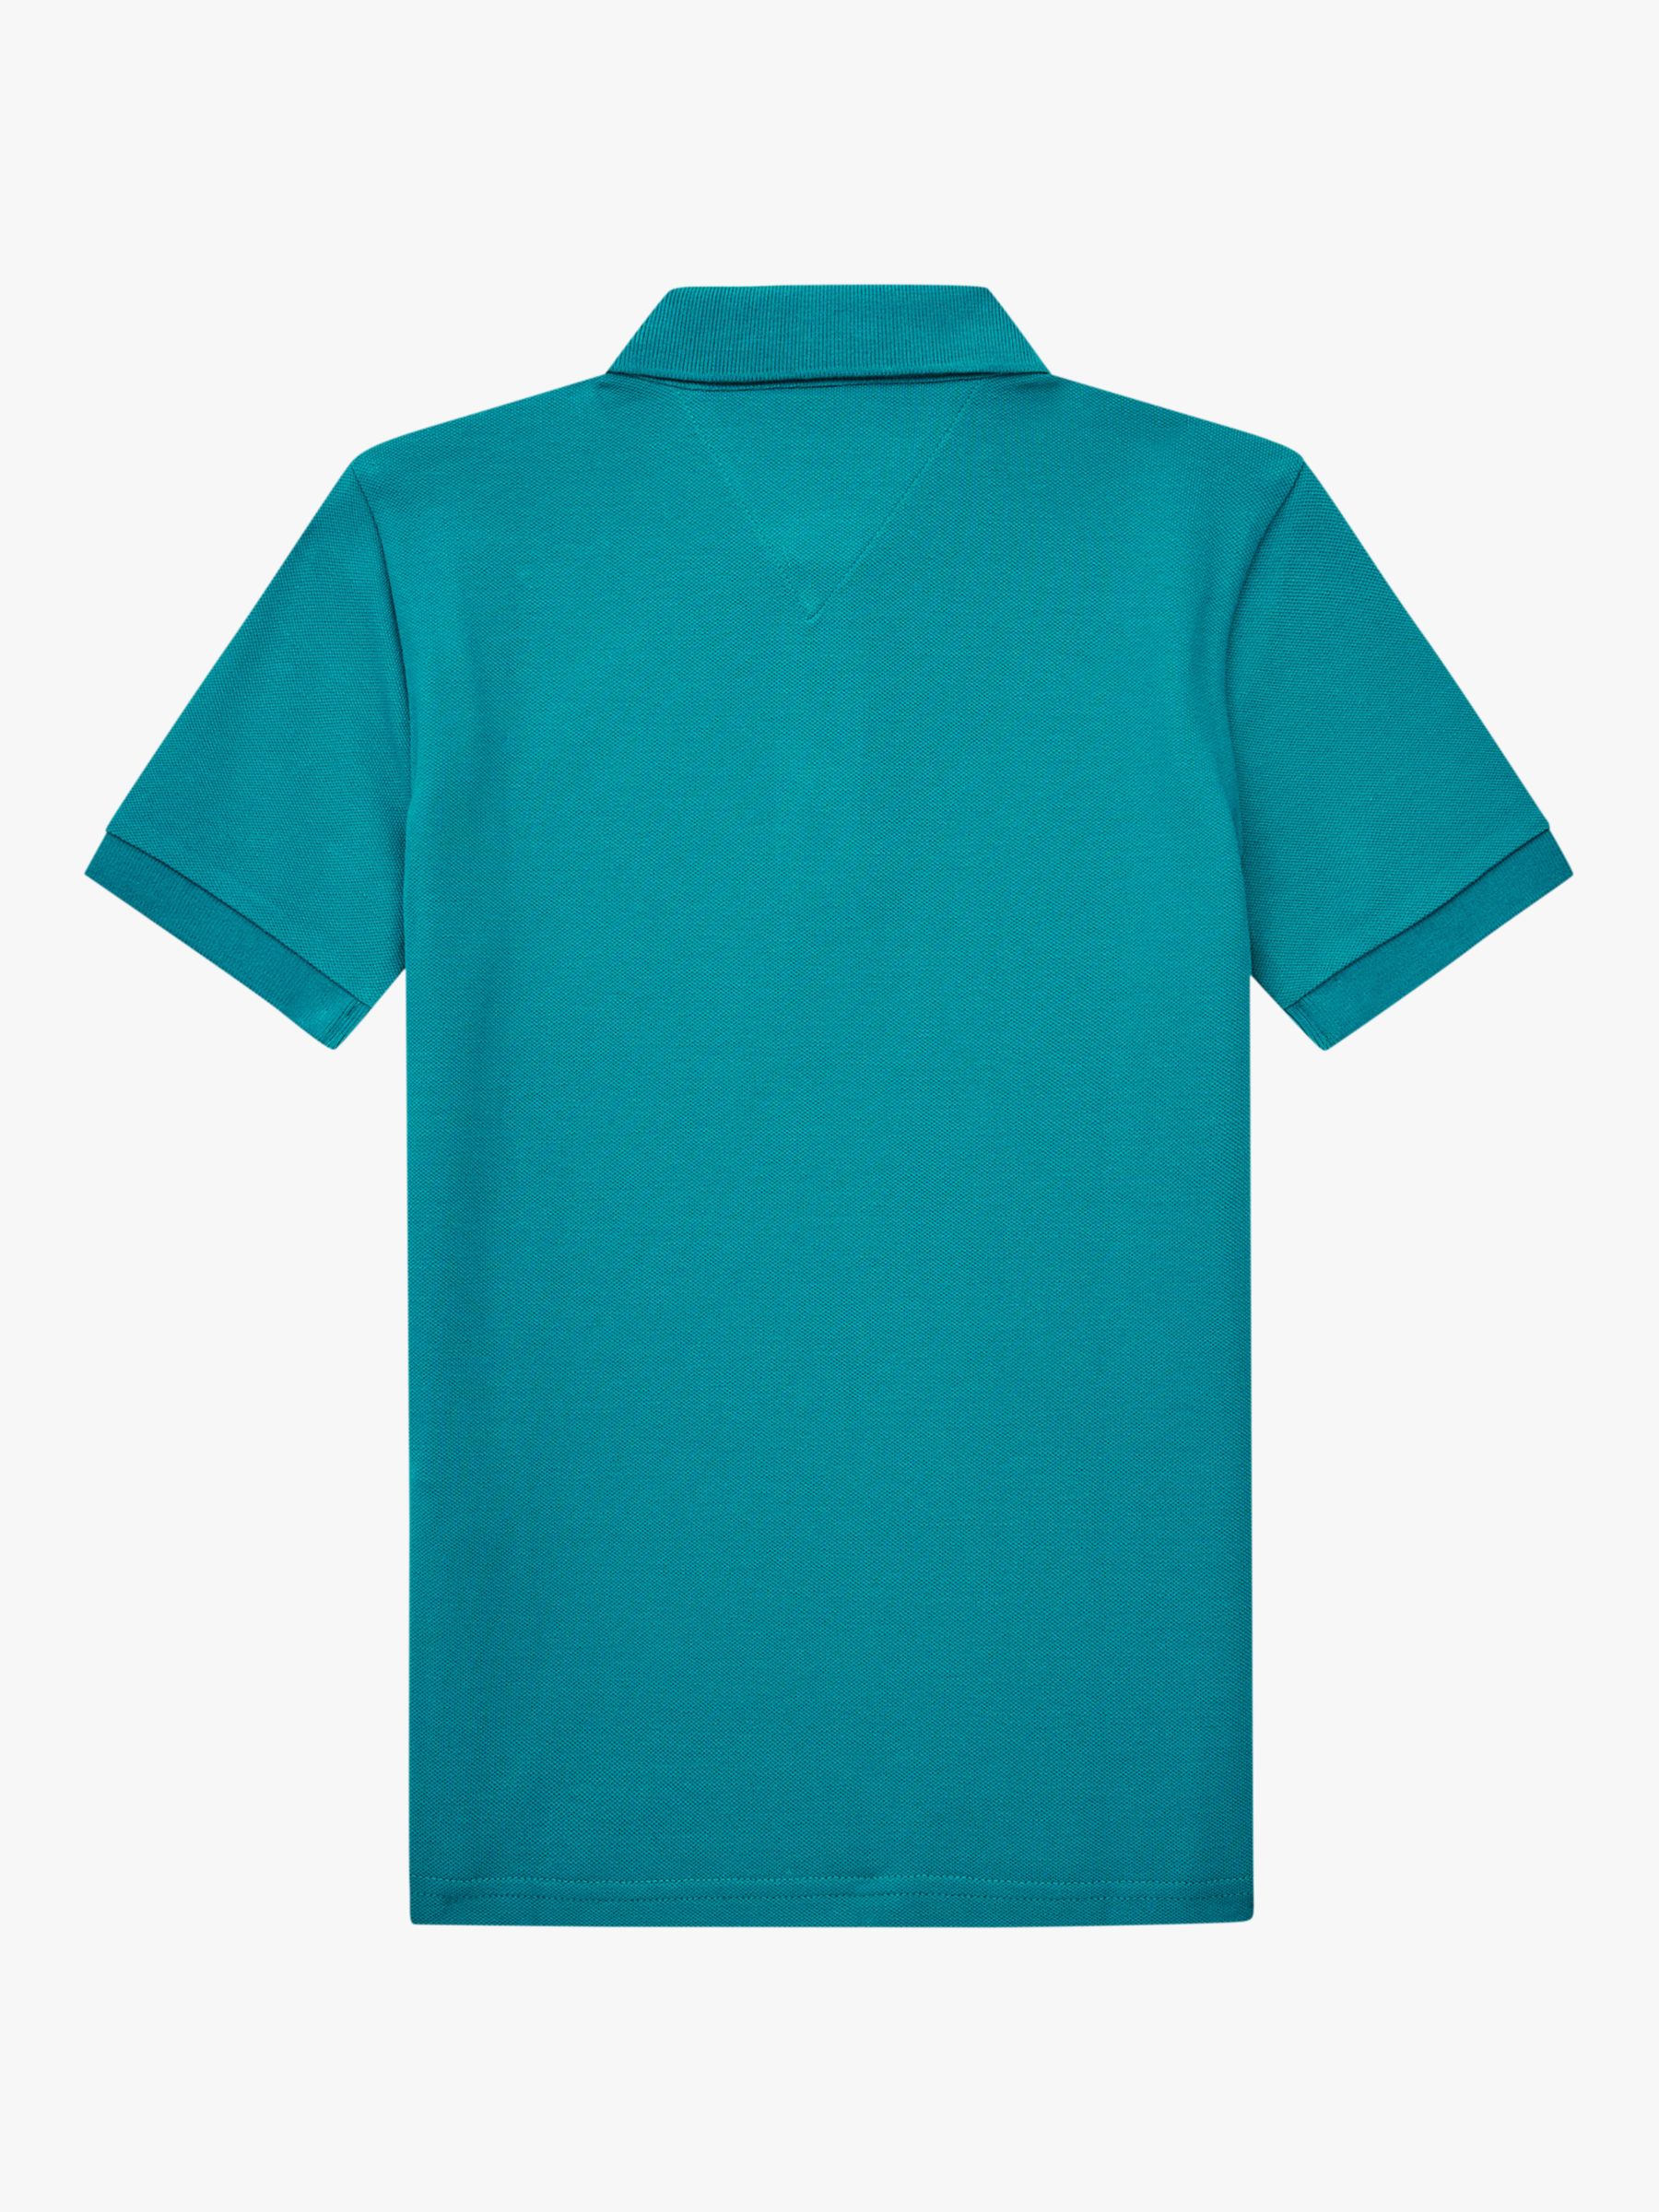 Tommy Hilfiger Kids' Essential Polo Shirt, Teal, 3 years